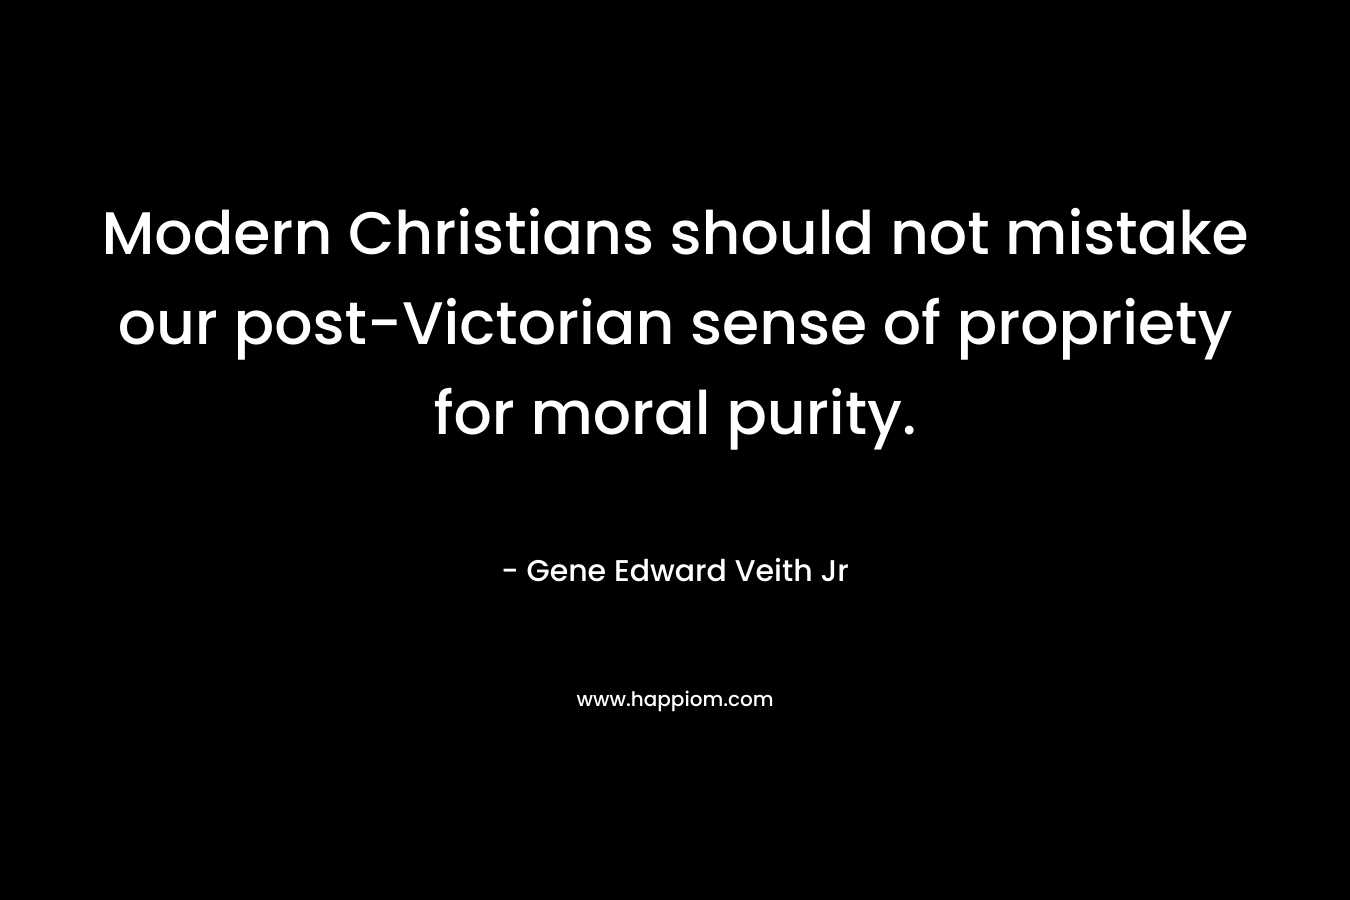 Modern Christians should not mistake our post-Victorian sense of propriety for moral purity. – Gene Edward Veith Jr